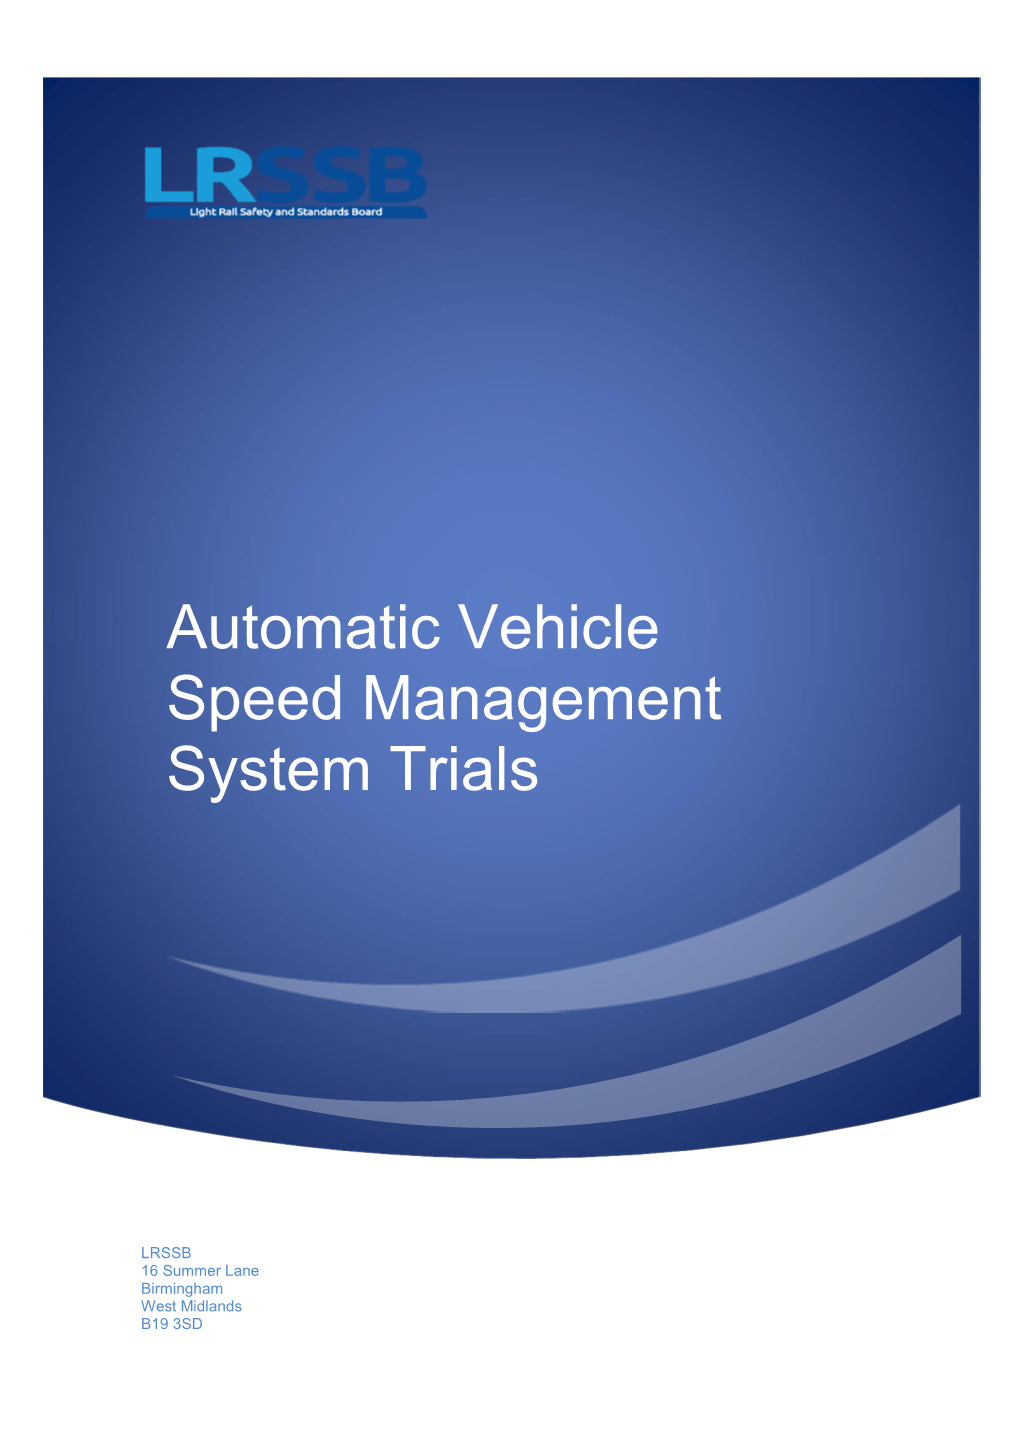 Automatic Vehicle Speed Management System Trials